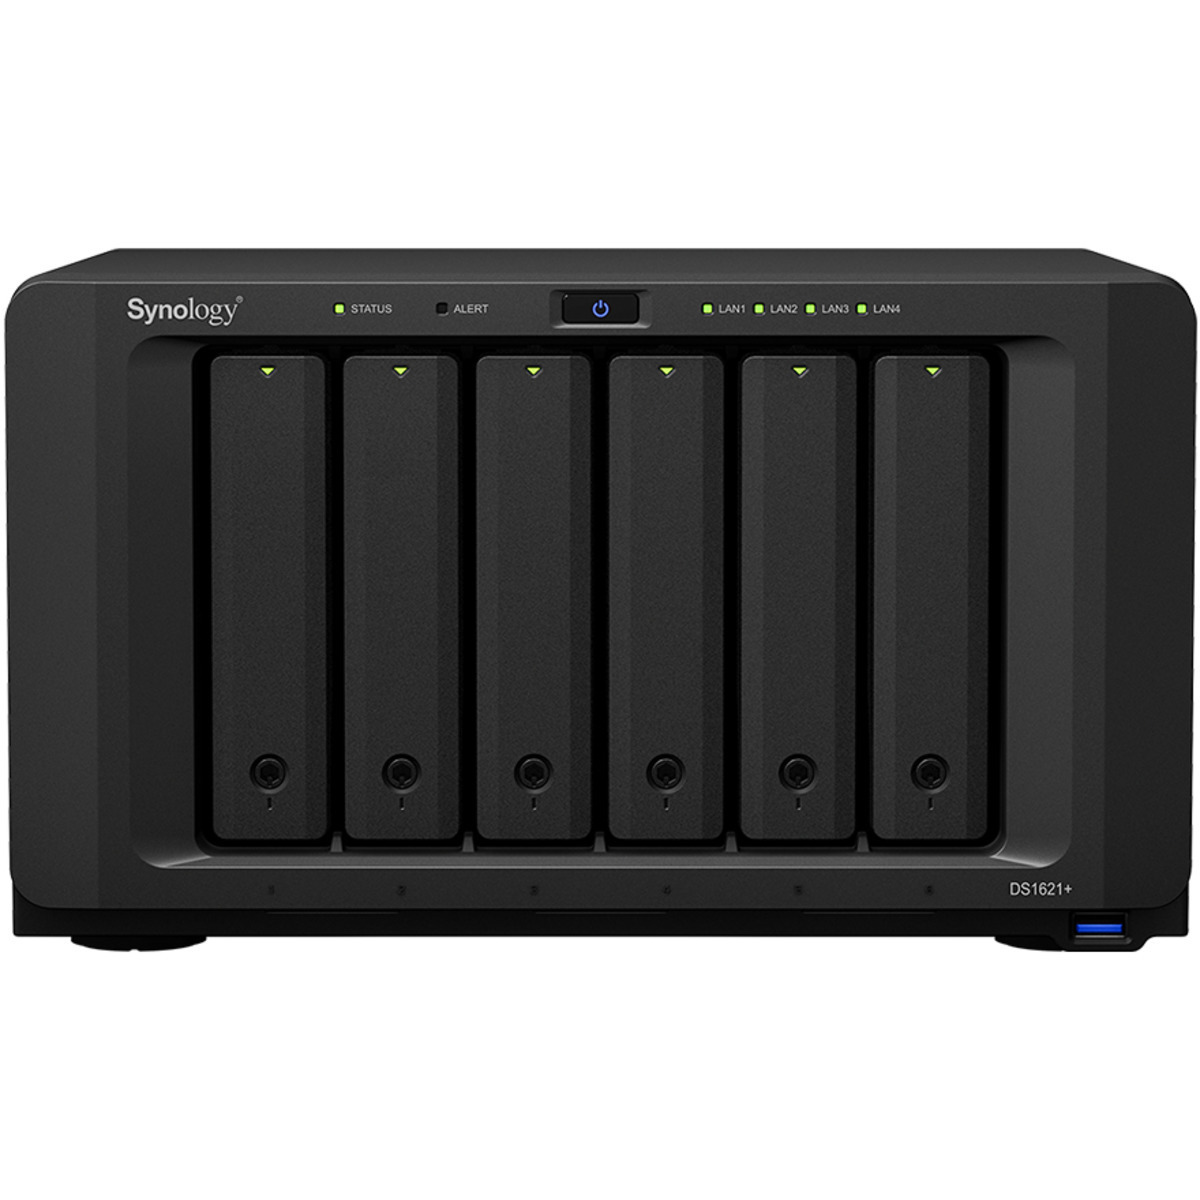 Synology DiskStation DS1621+ 96tb 6-Bay Desktop Multimedia / Power User / Business NAS - Network Attached Storage Device 4x24tb Seagate IronWolf Pro ST24000NT002 3.5 7200rpm SATA 6Gb/s HDD NAS Class Drives Installed - Burn-In Tested - FREE RAM UPGRADE DiskStation DS1621+